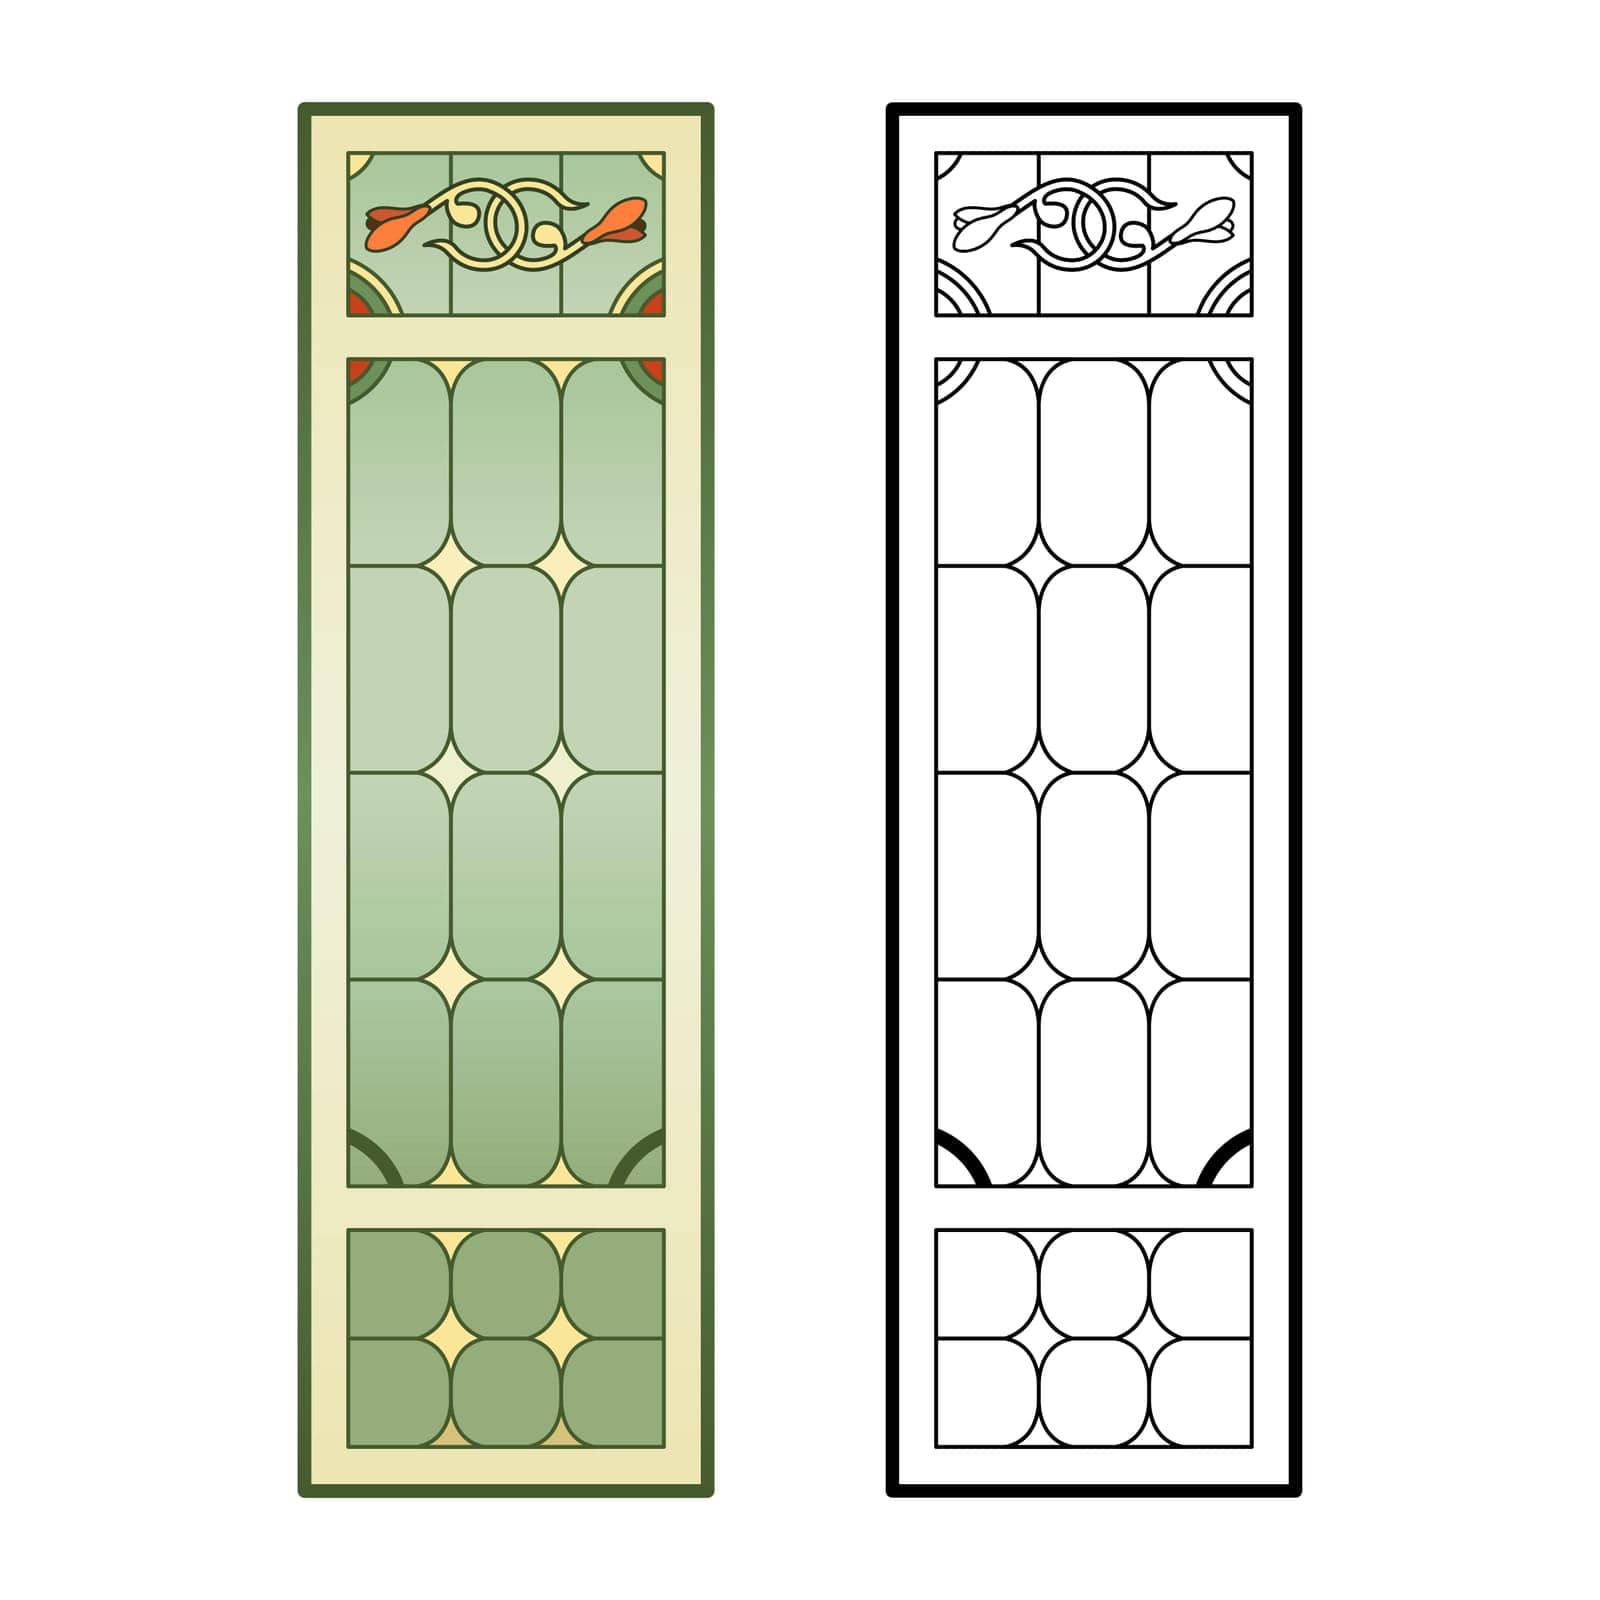 Stained Church glass window worksheet.